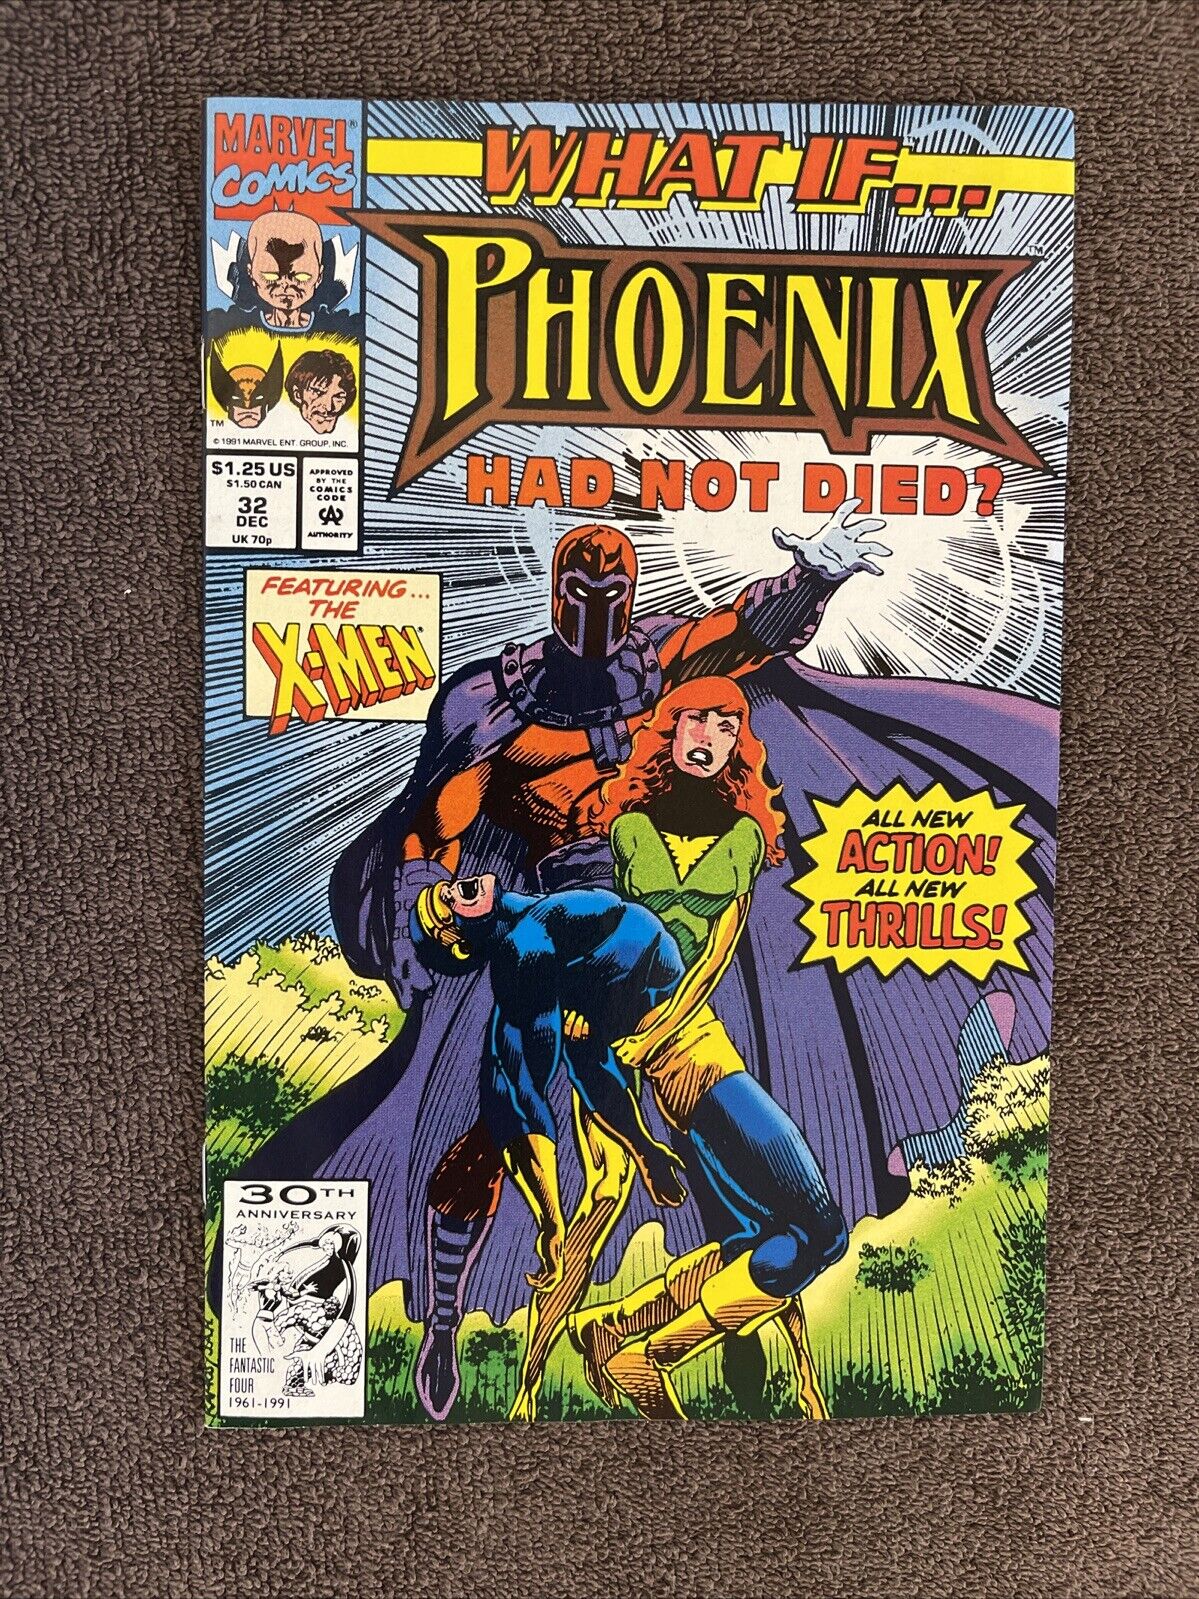 WHAT IF...? #32 (Marvel, 1991) PHOENIX Had Not Died